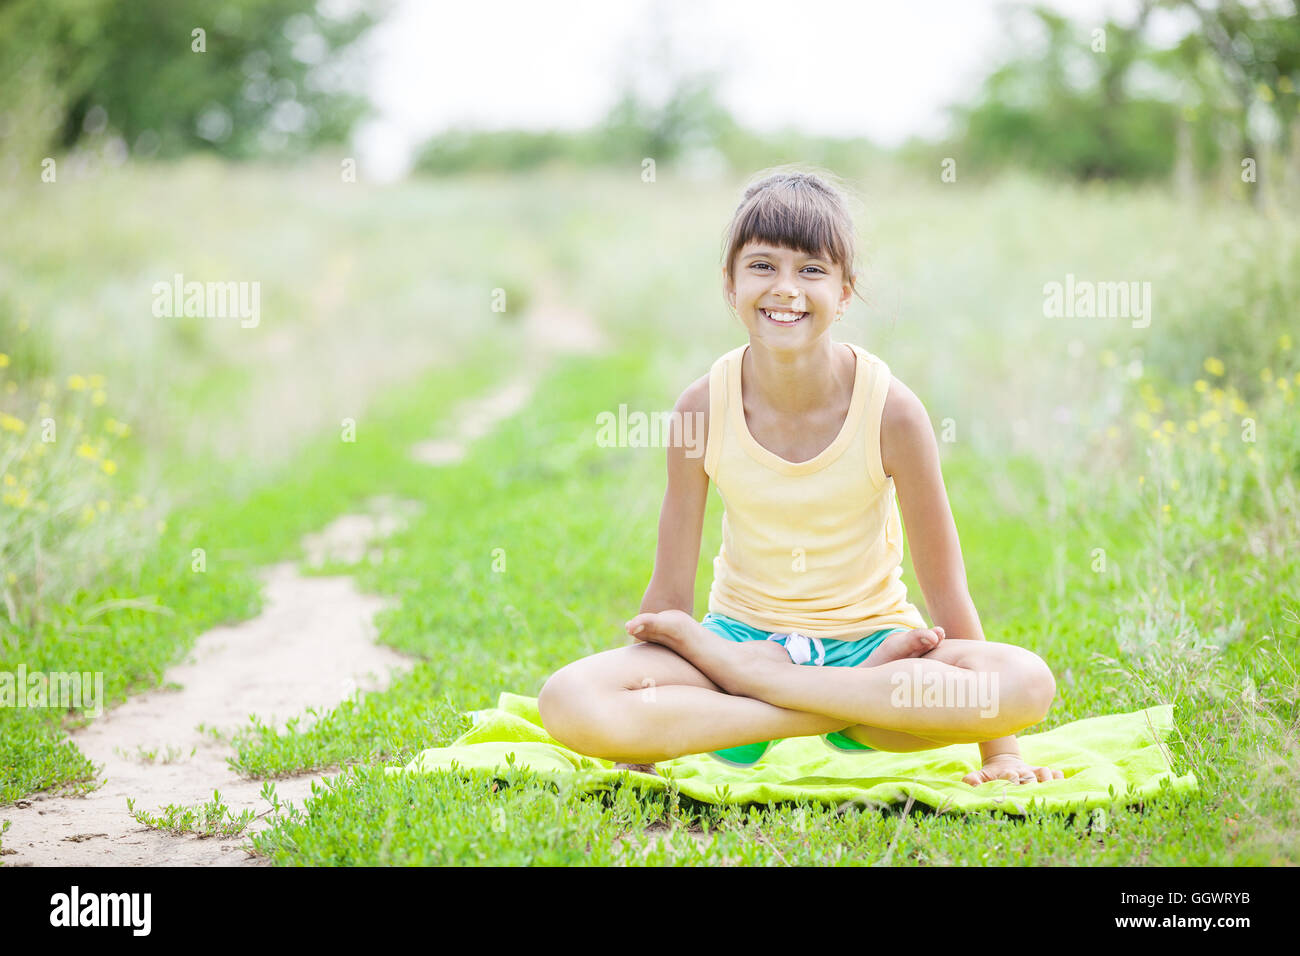 Young girl smiling while sitting in lotus position outdoors Stock Photo